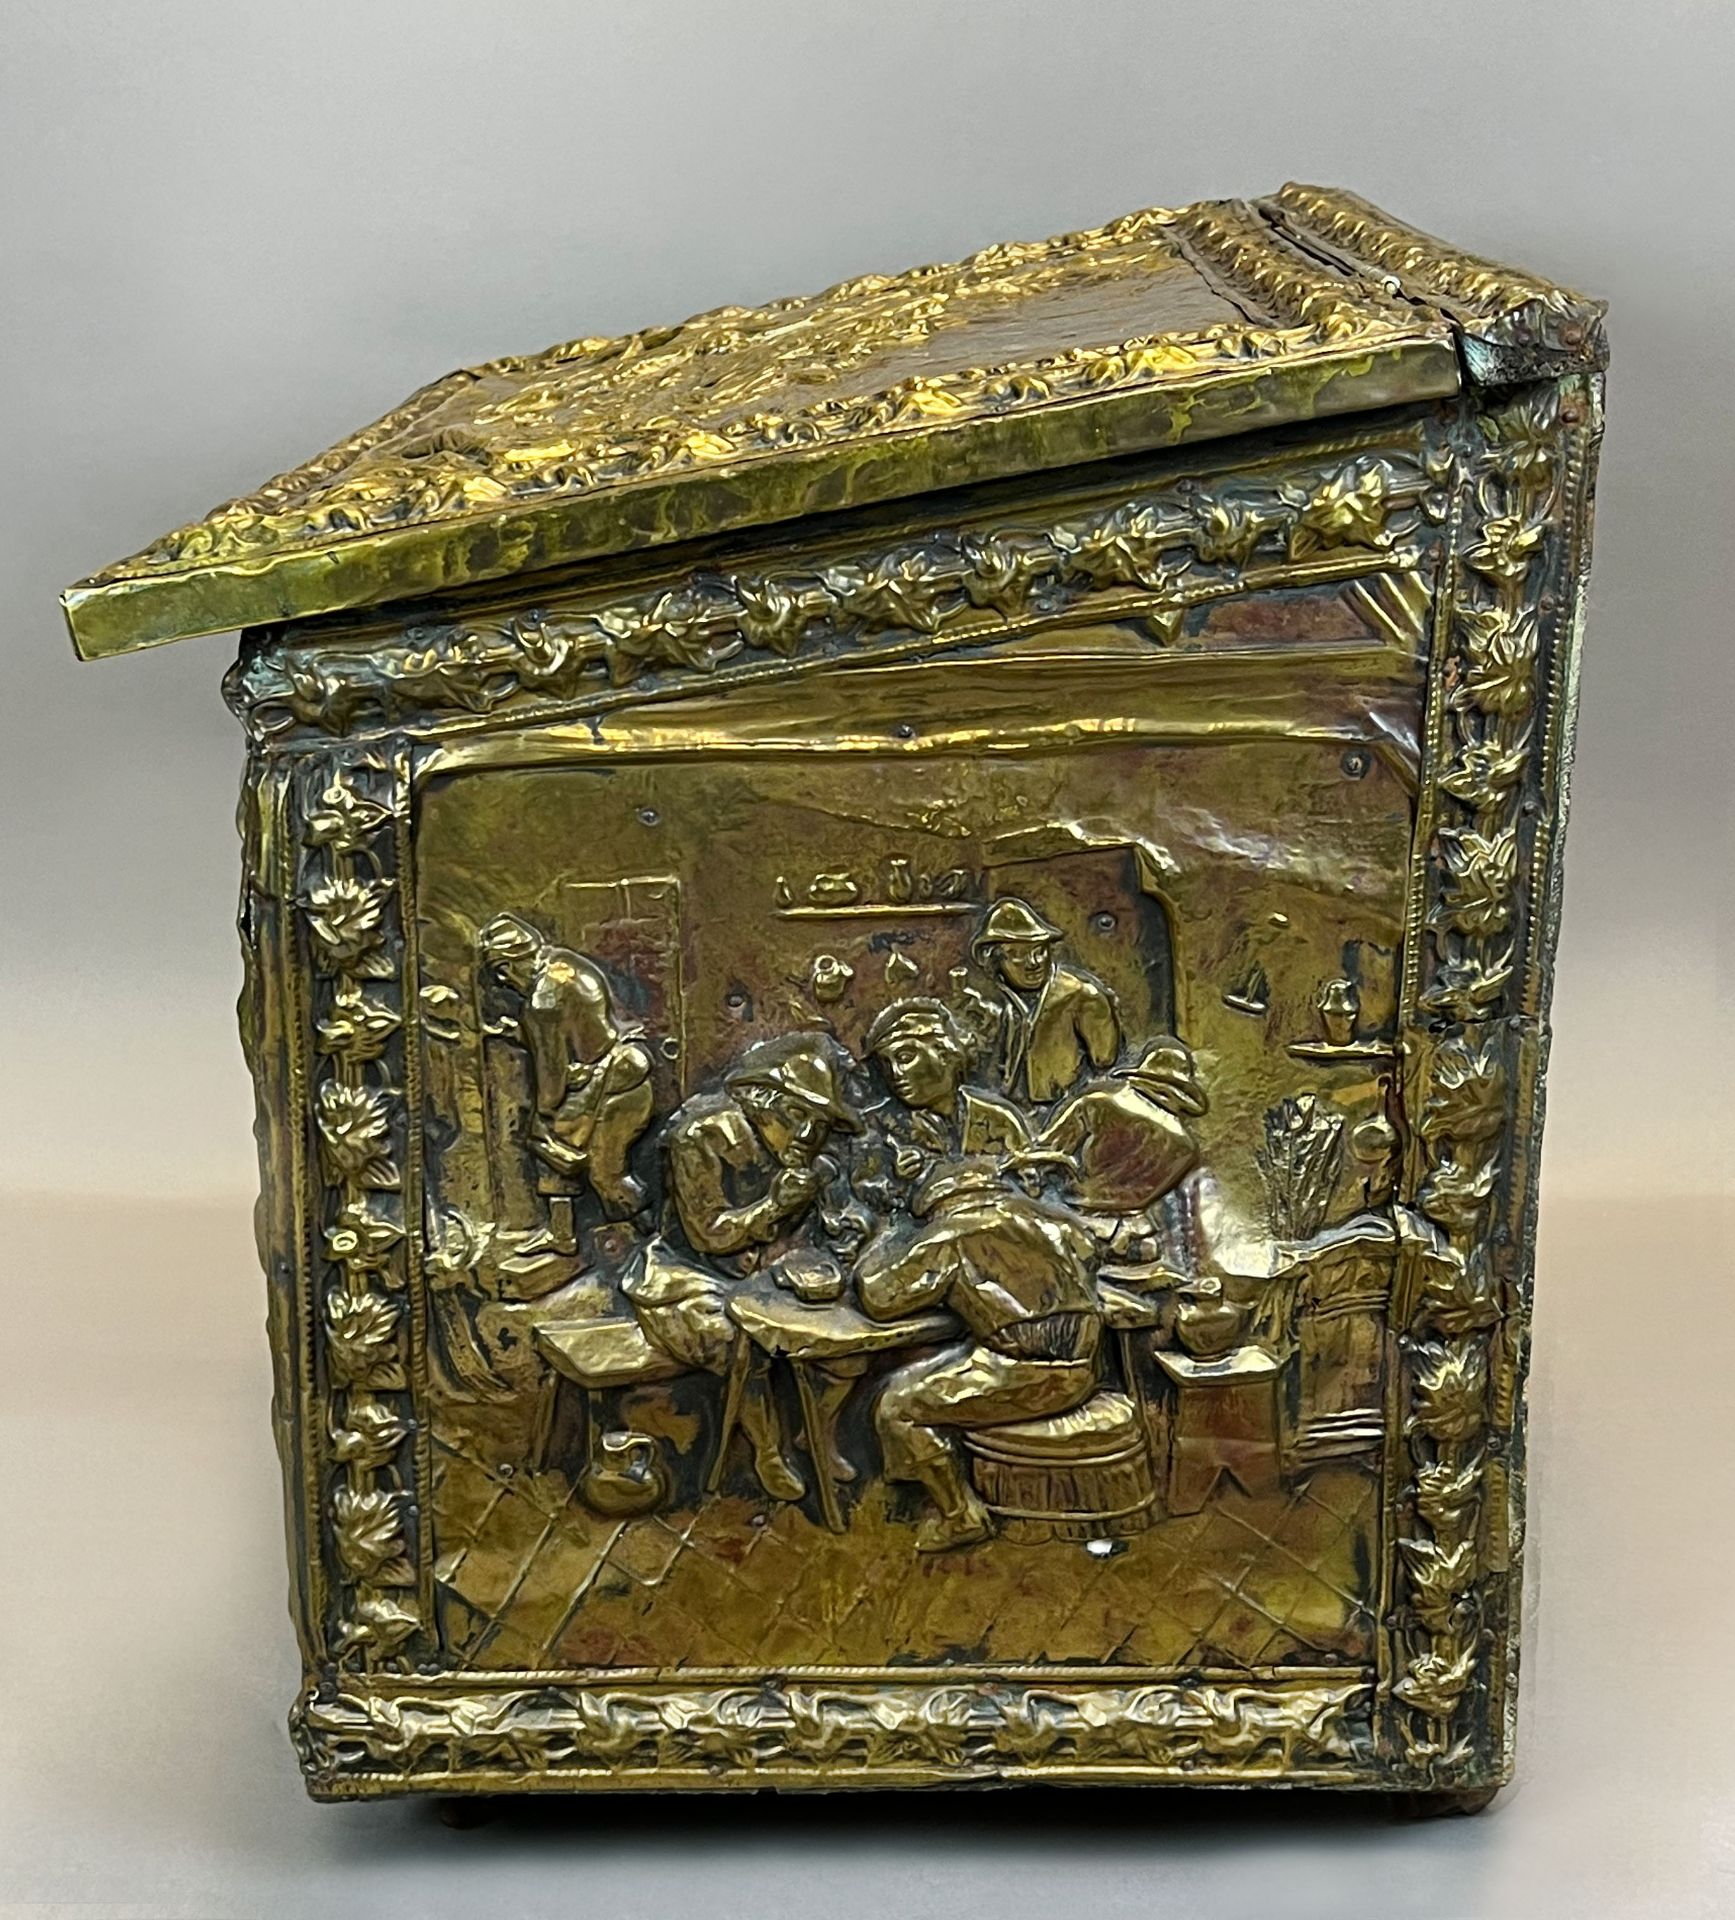 Small wooden chest with brass plate decoration. Probably 19th century. - Image 5 of 15